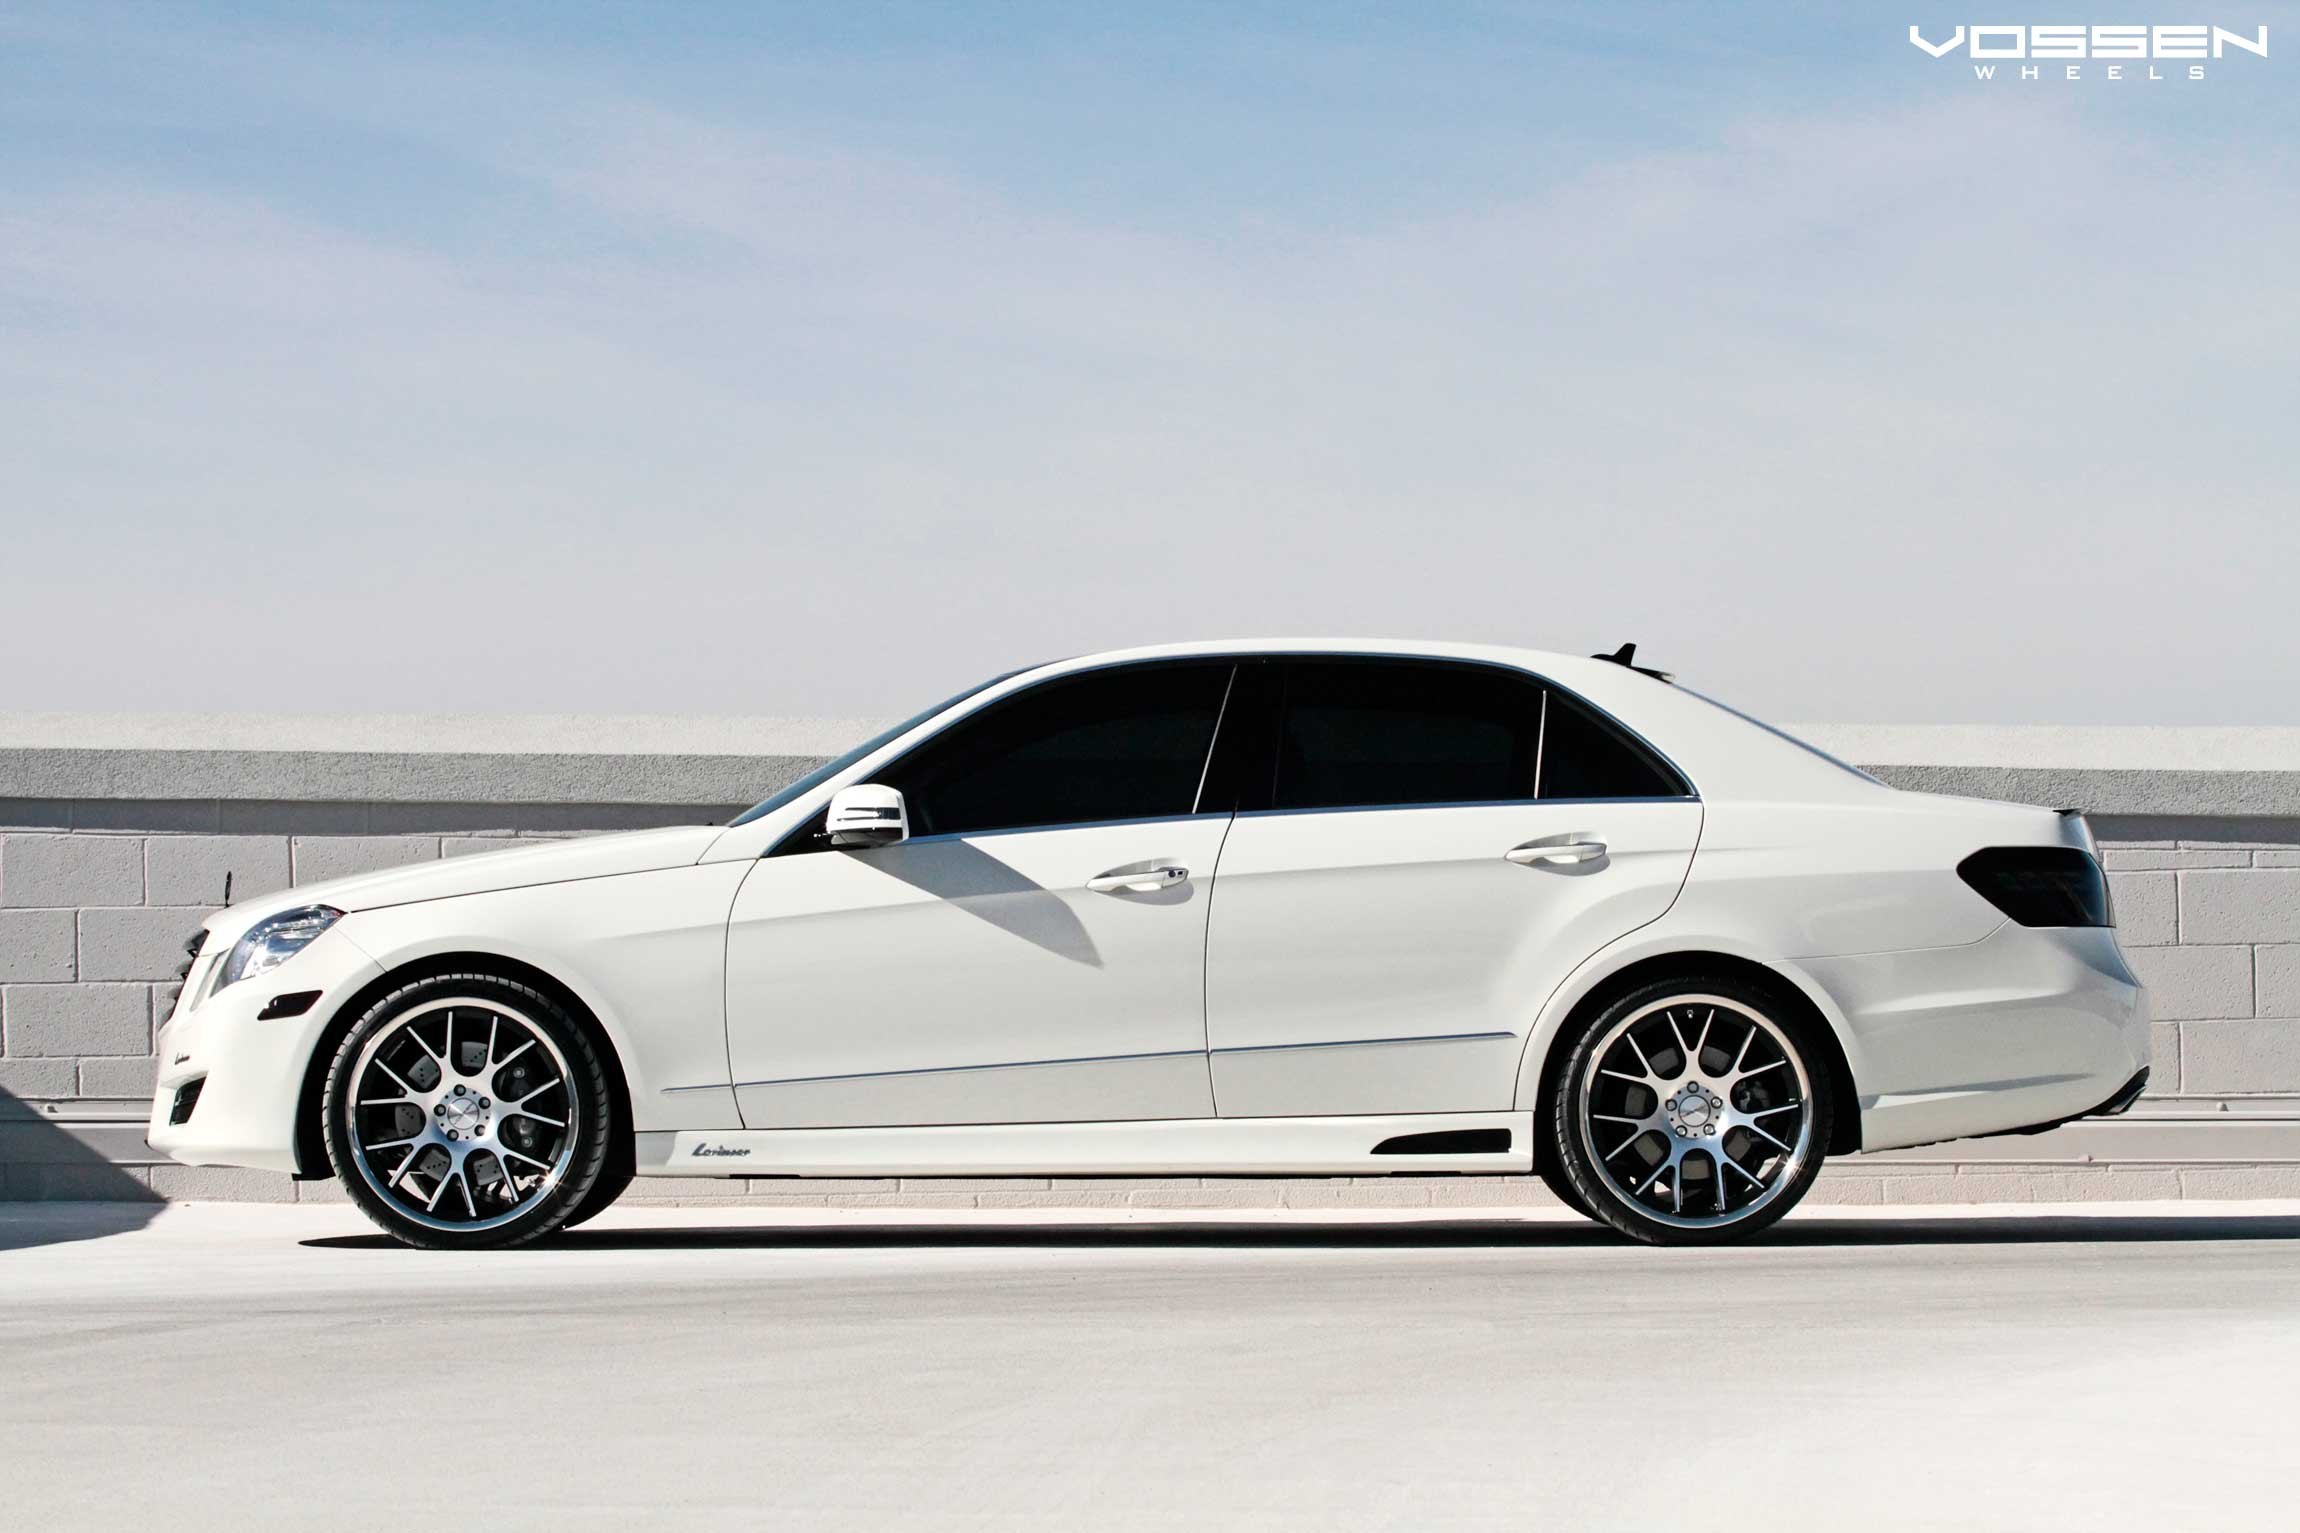 Aftermarket Side Skirts on White Mercedes E Class - Photo by Vossen